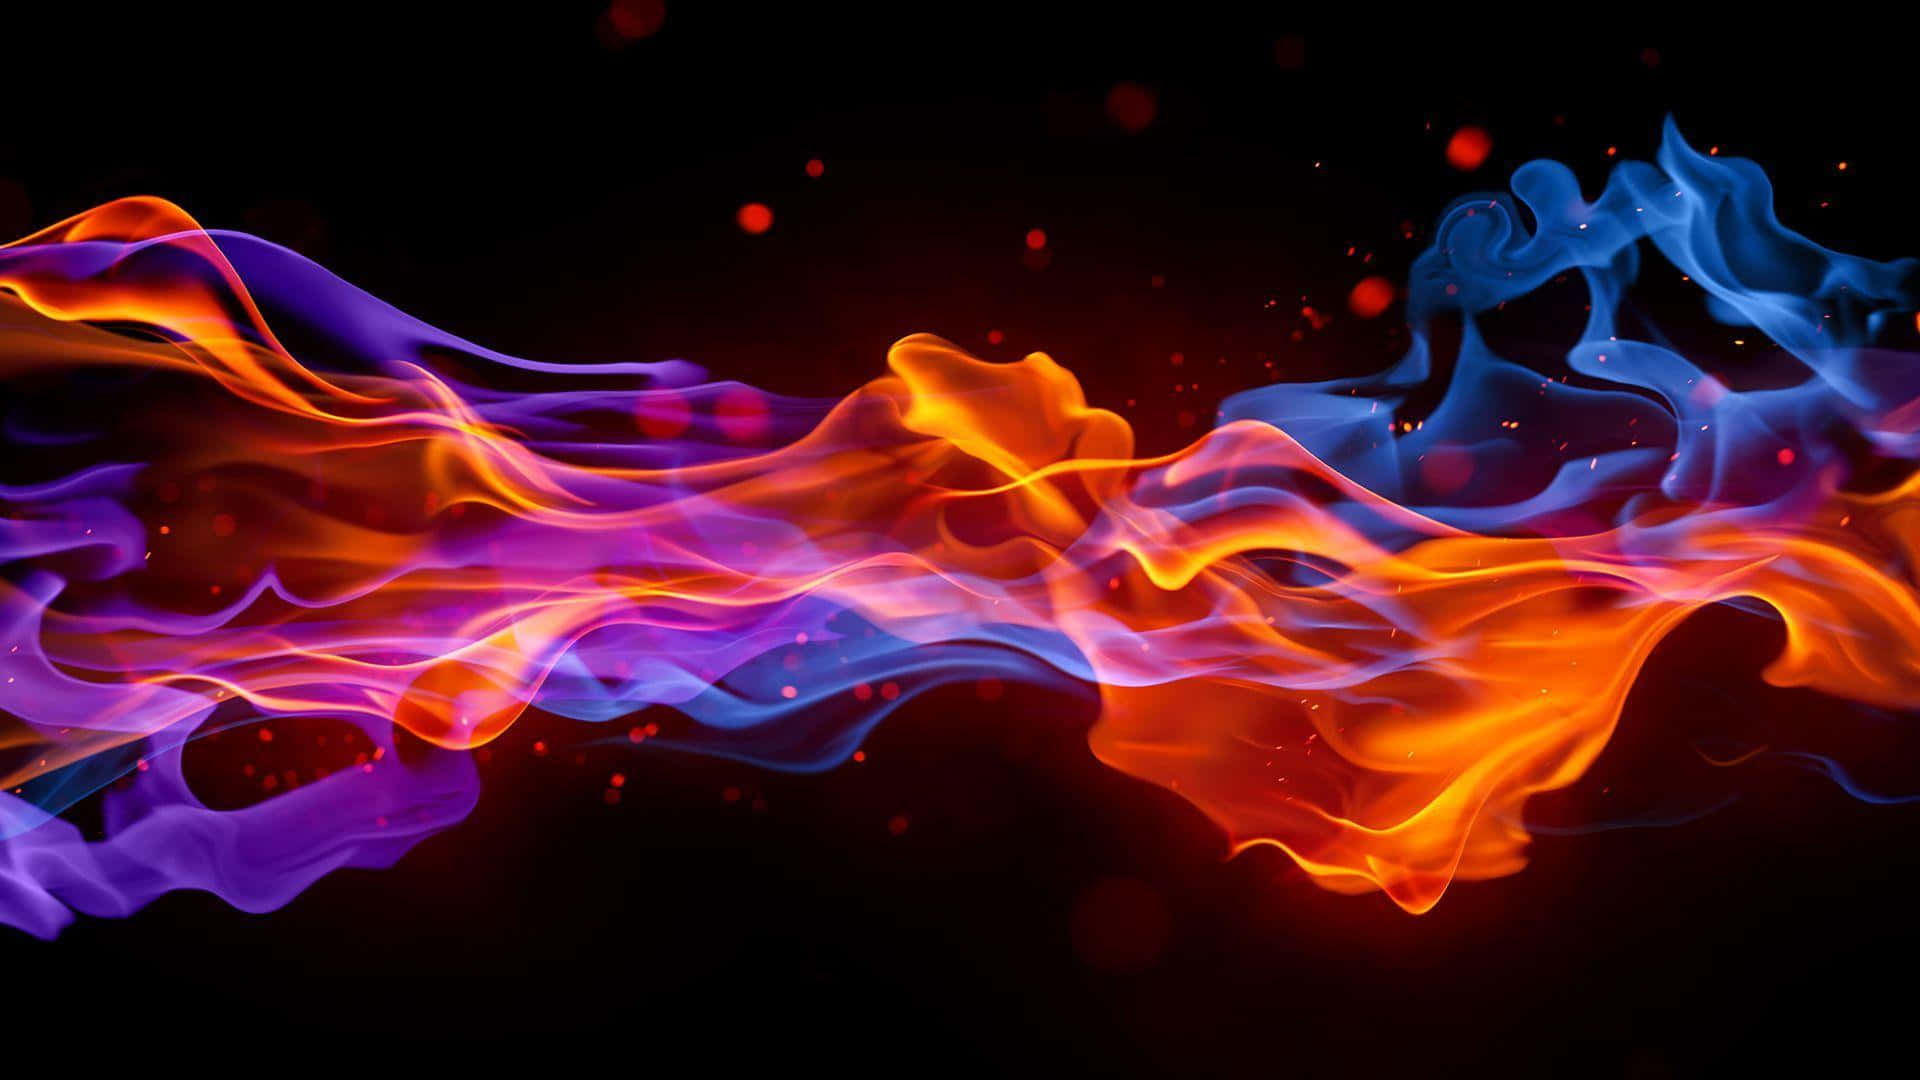 Igniting Flames in 3D Wallpaper